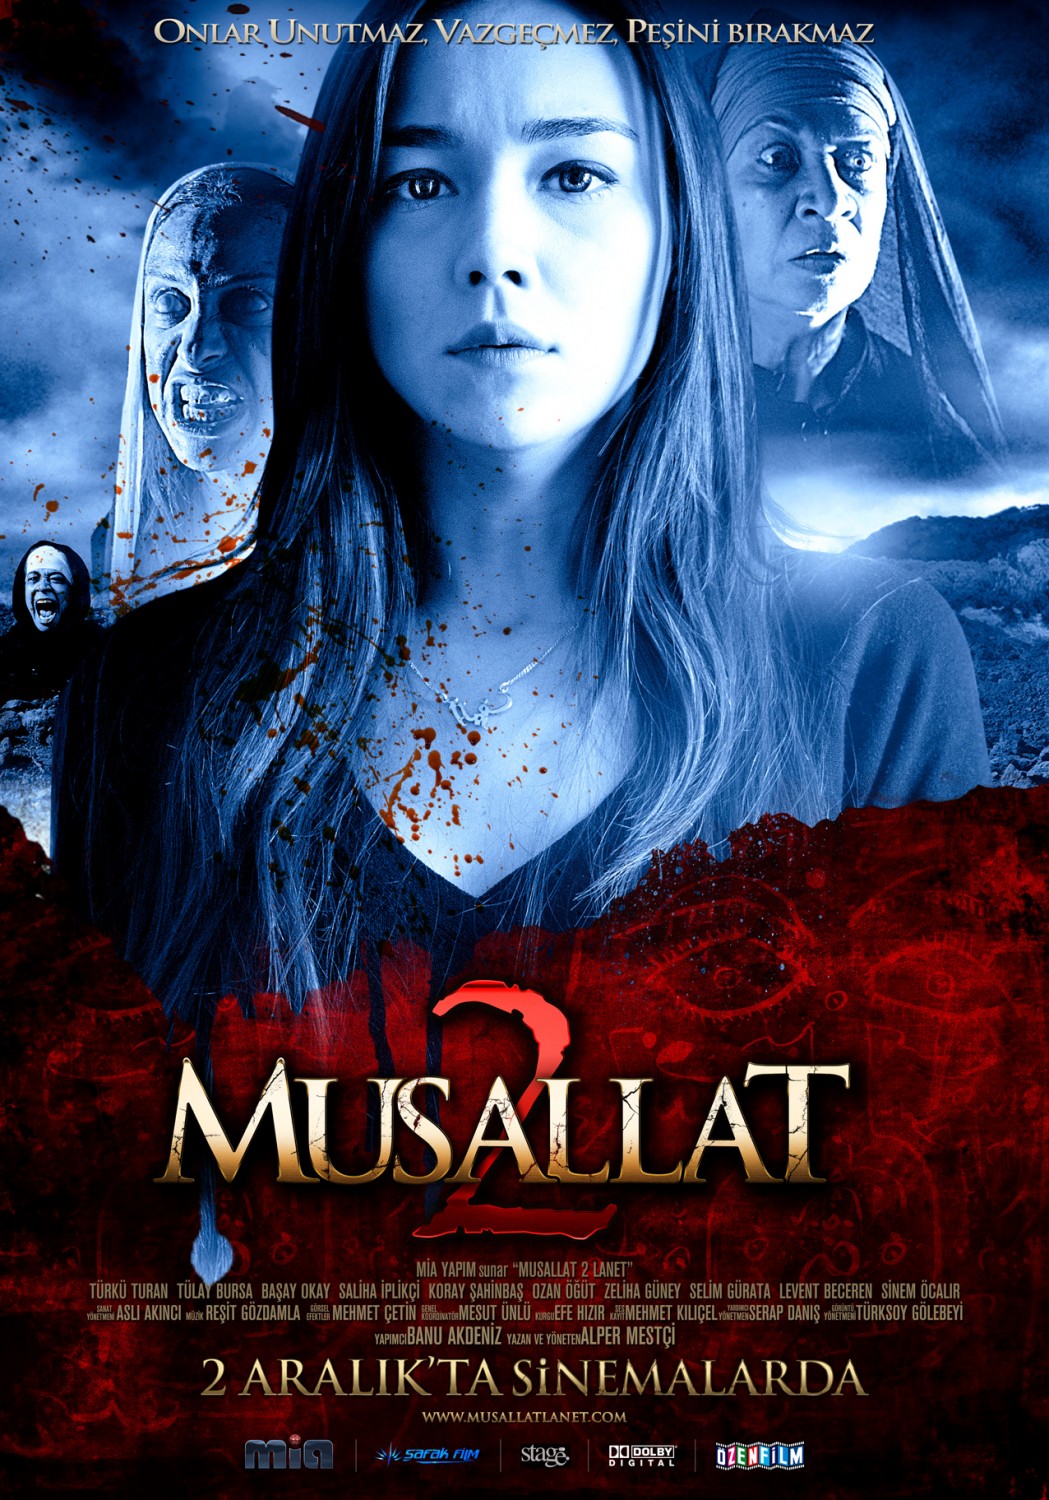 Extra Large Movie Poster Image for Musallat 2: Lanet 